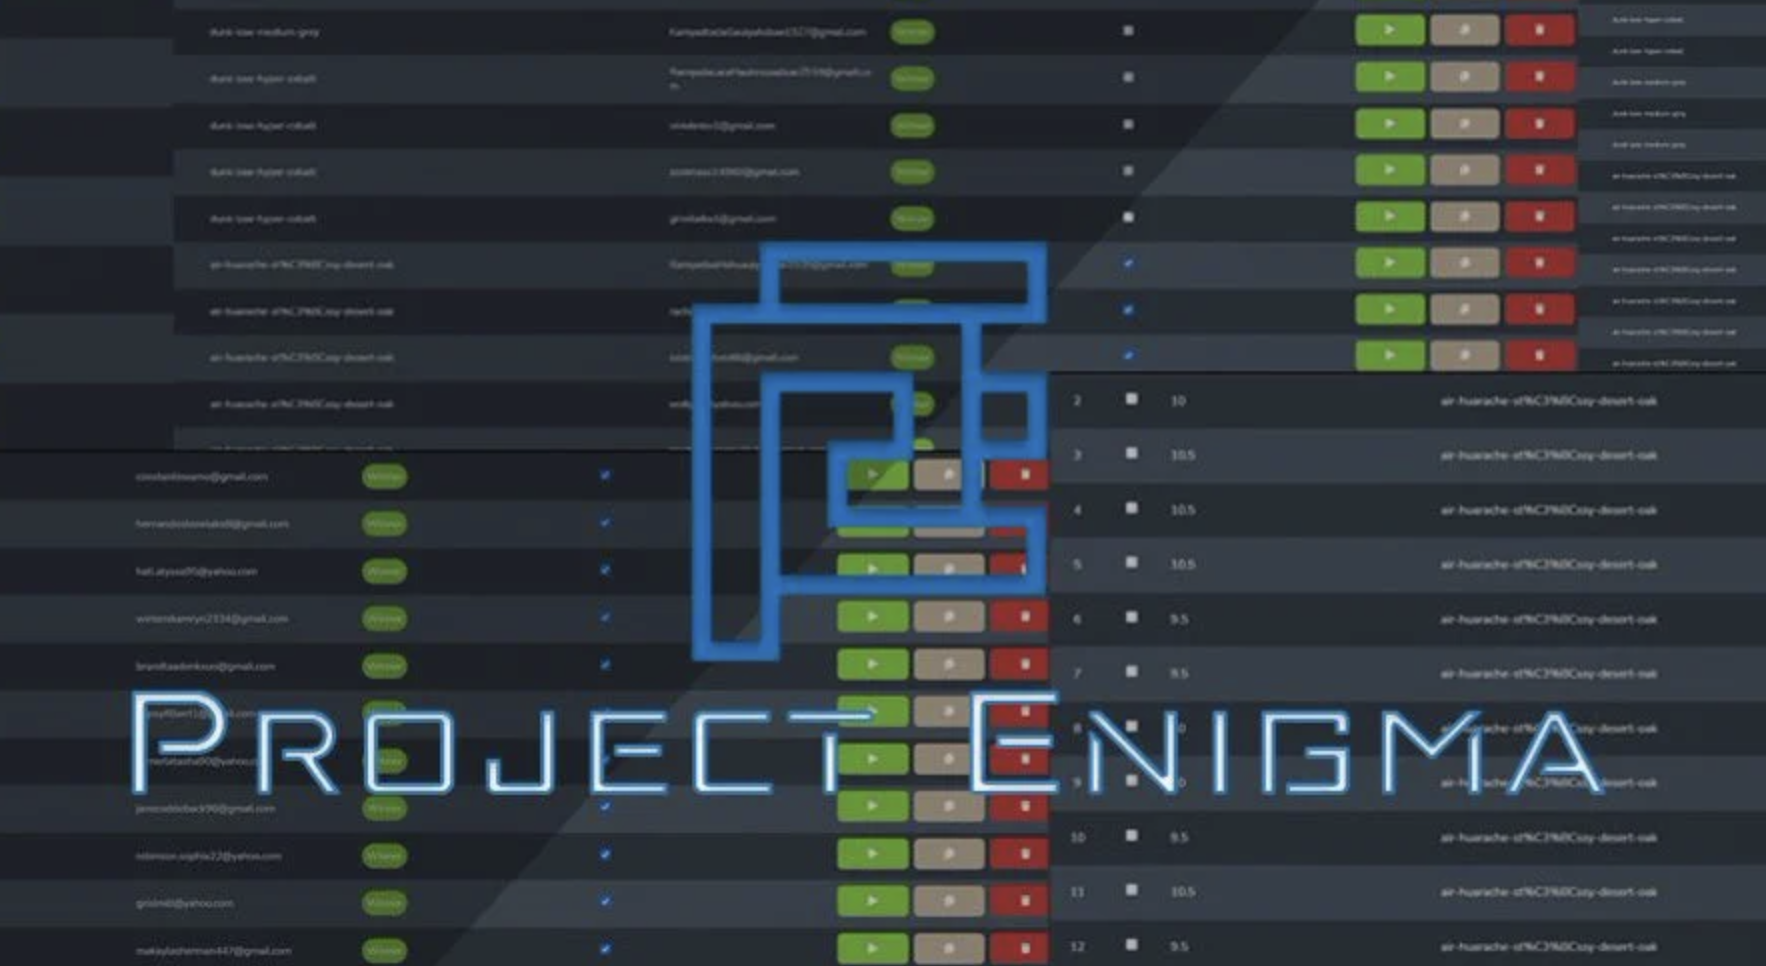 Project Enigma Bot Graphic